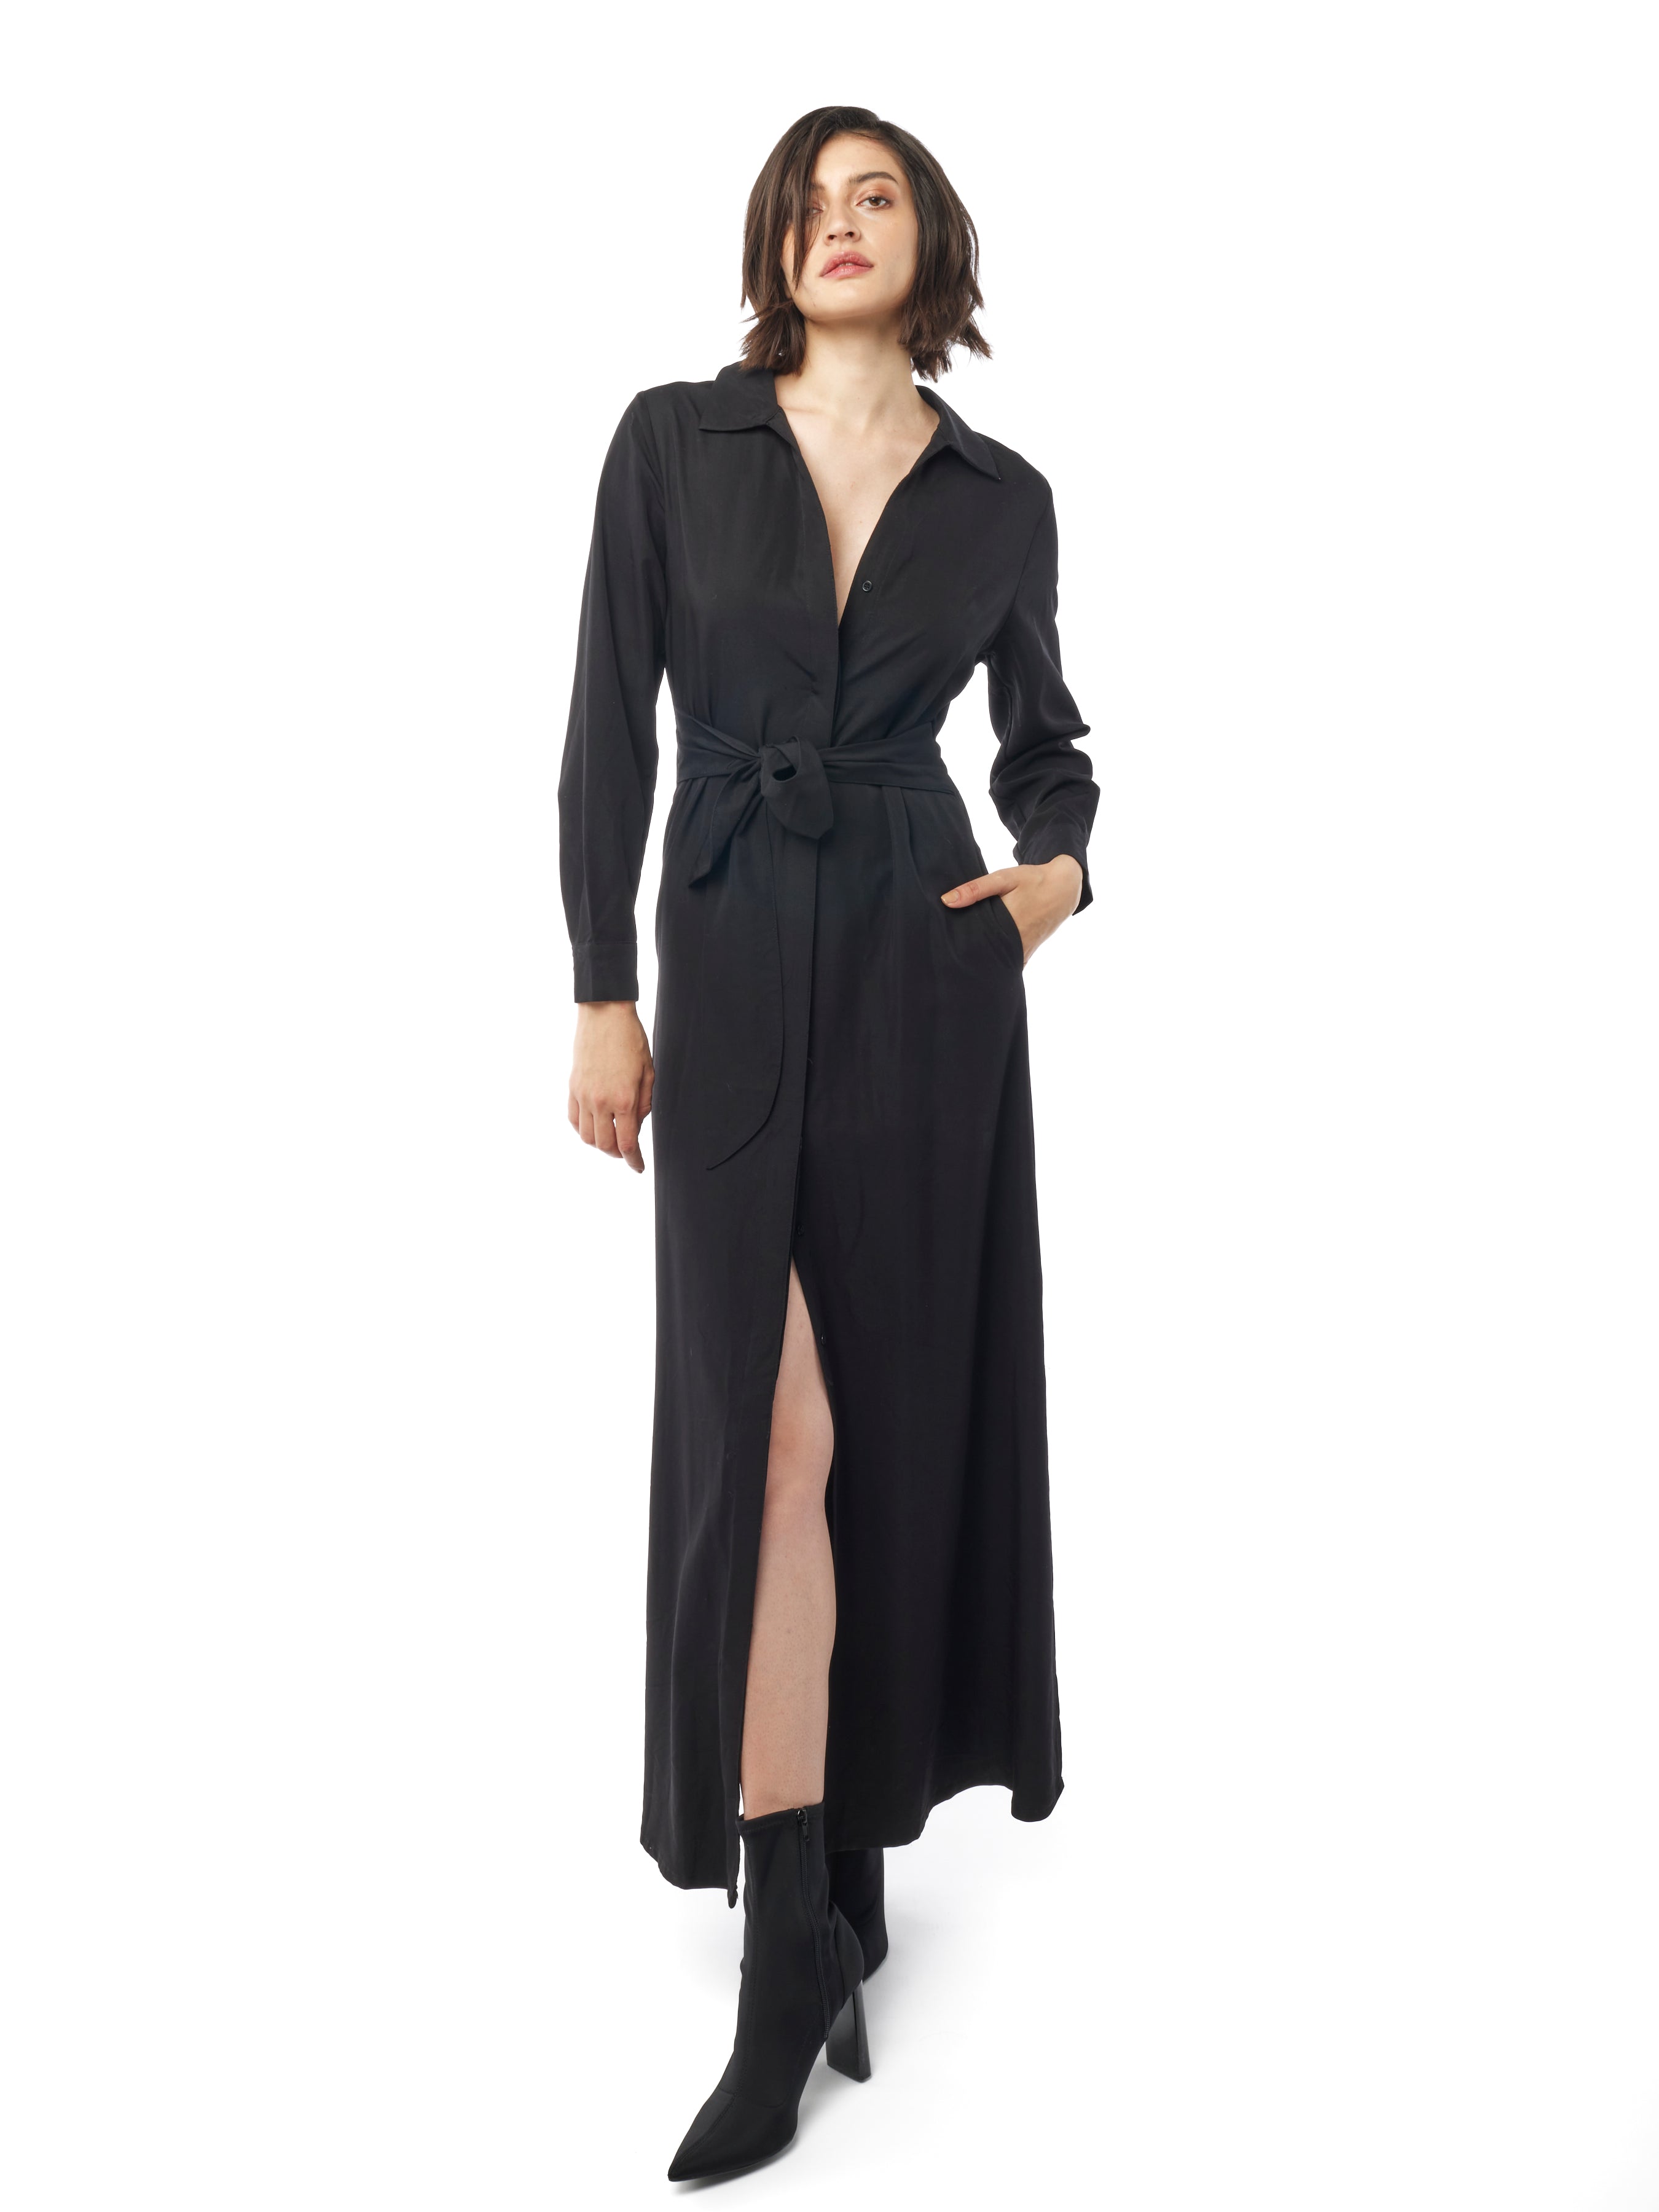 Long collared black dress with button down front, long cuffed sleeves and pockets. Front view